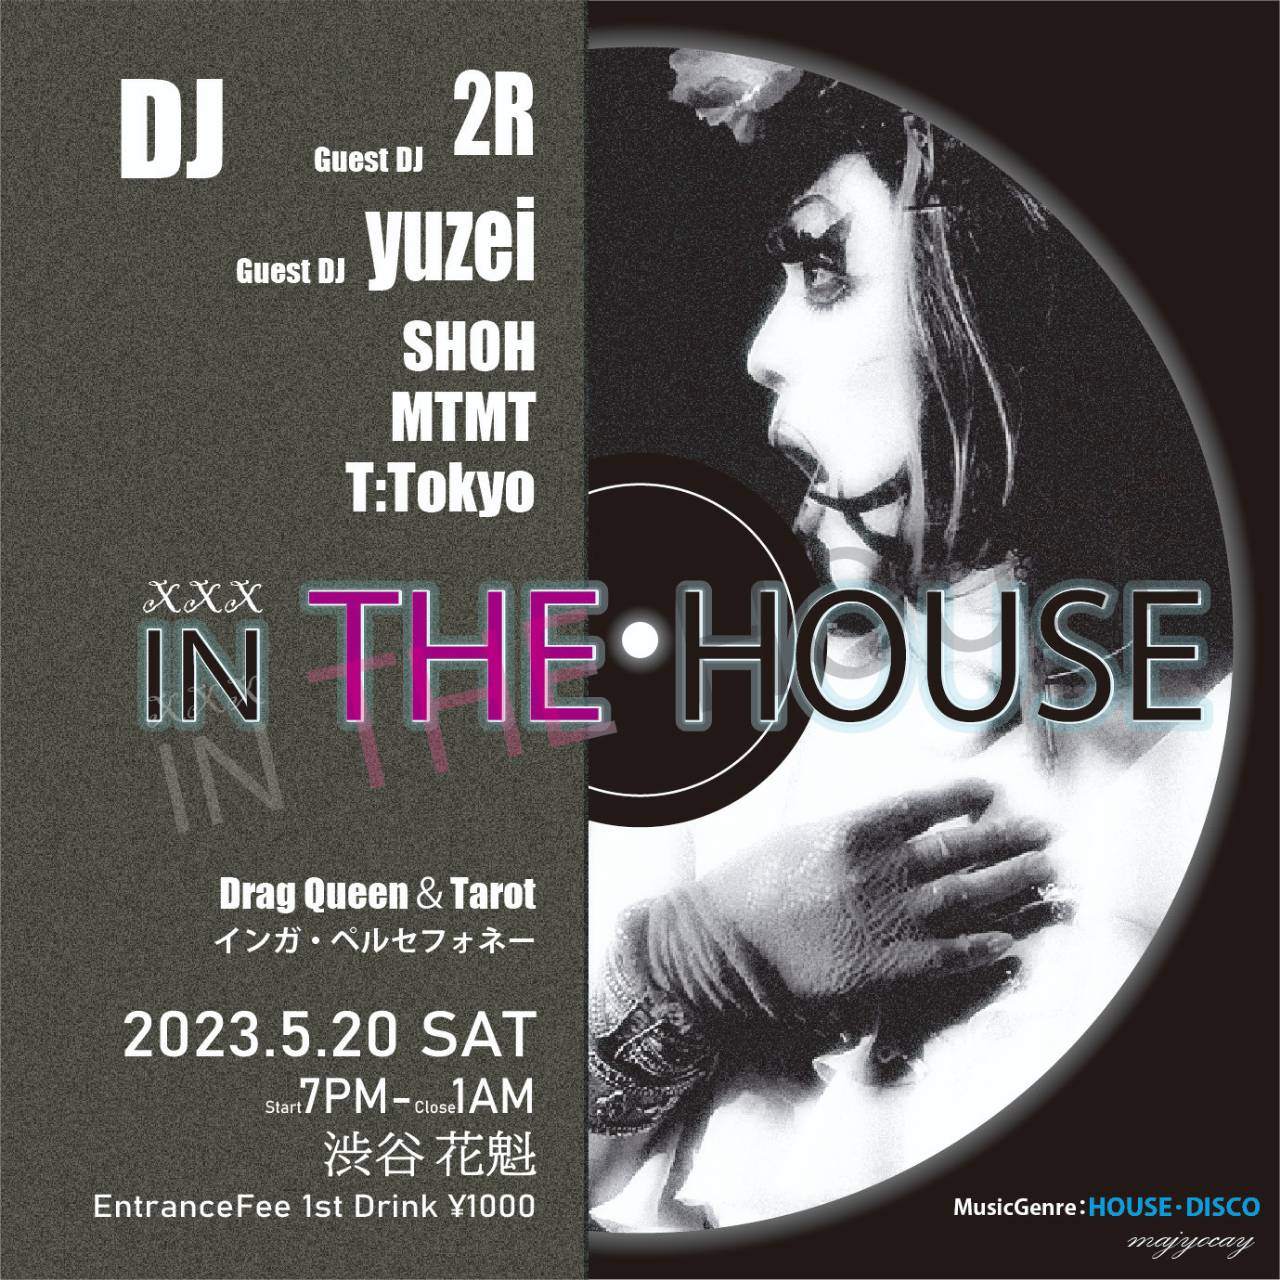 xxx IN THE HOUSE - フライヤー表